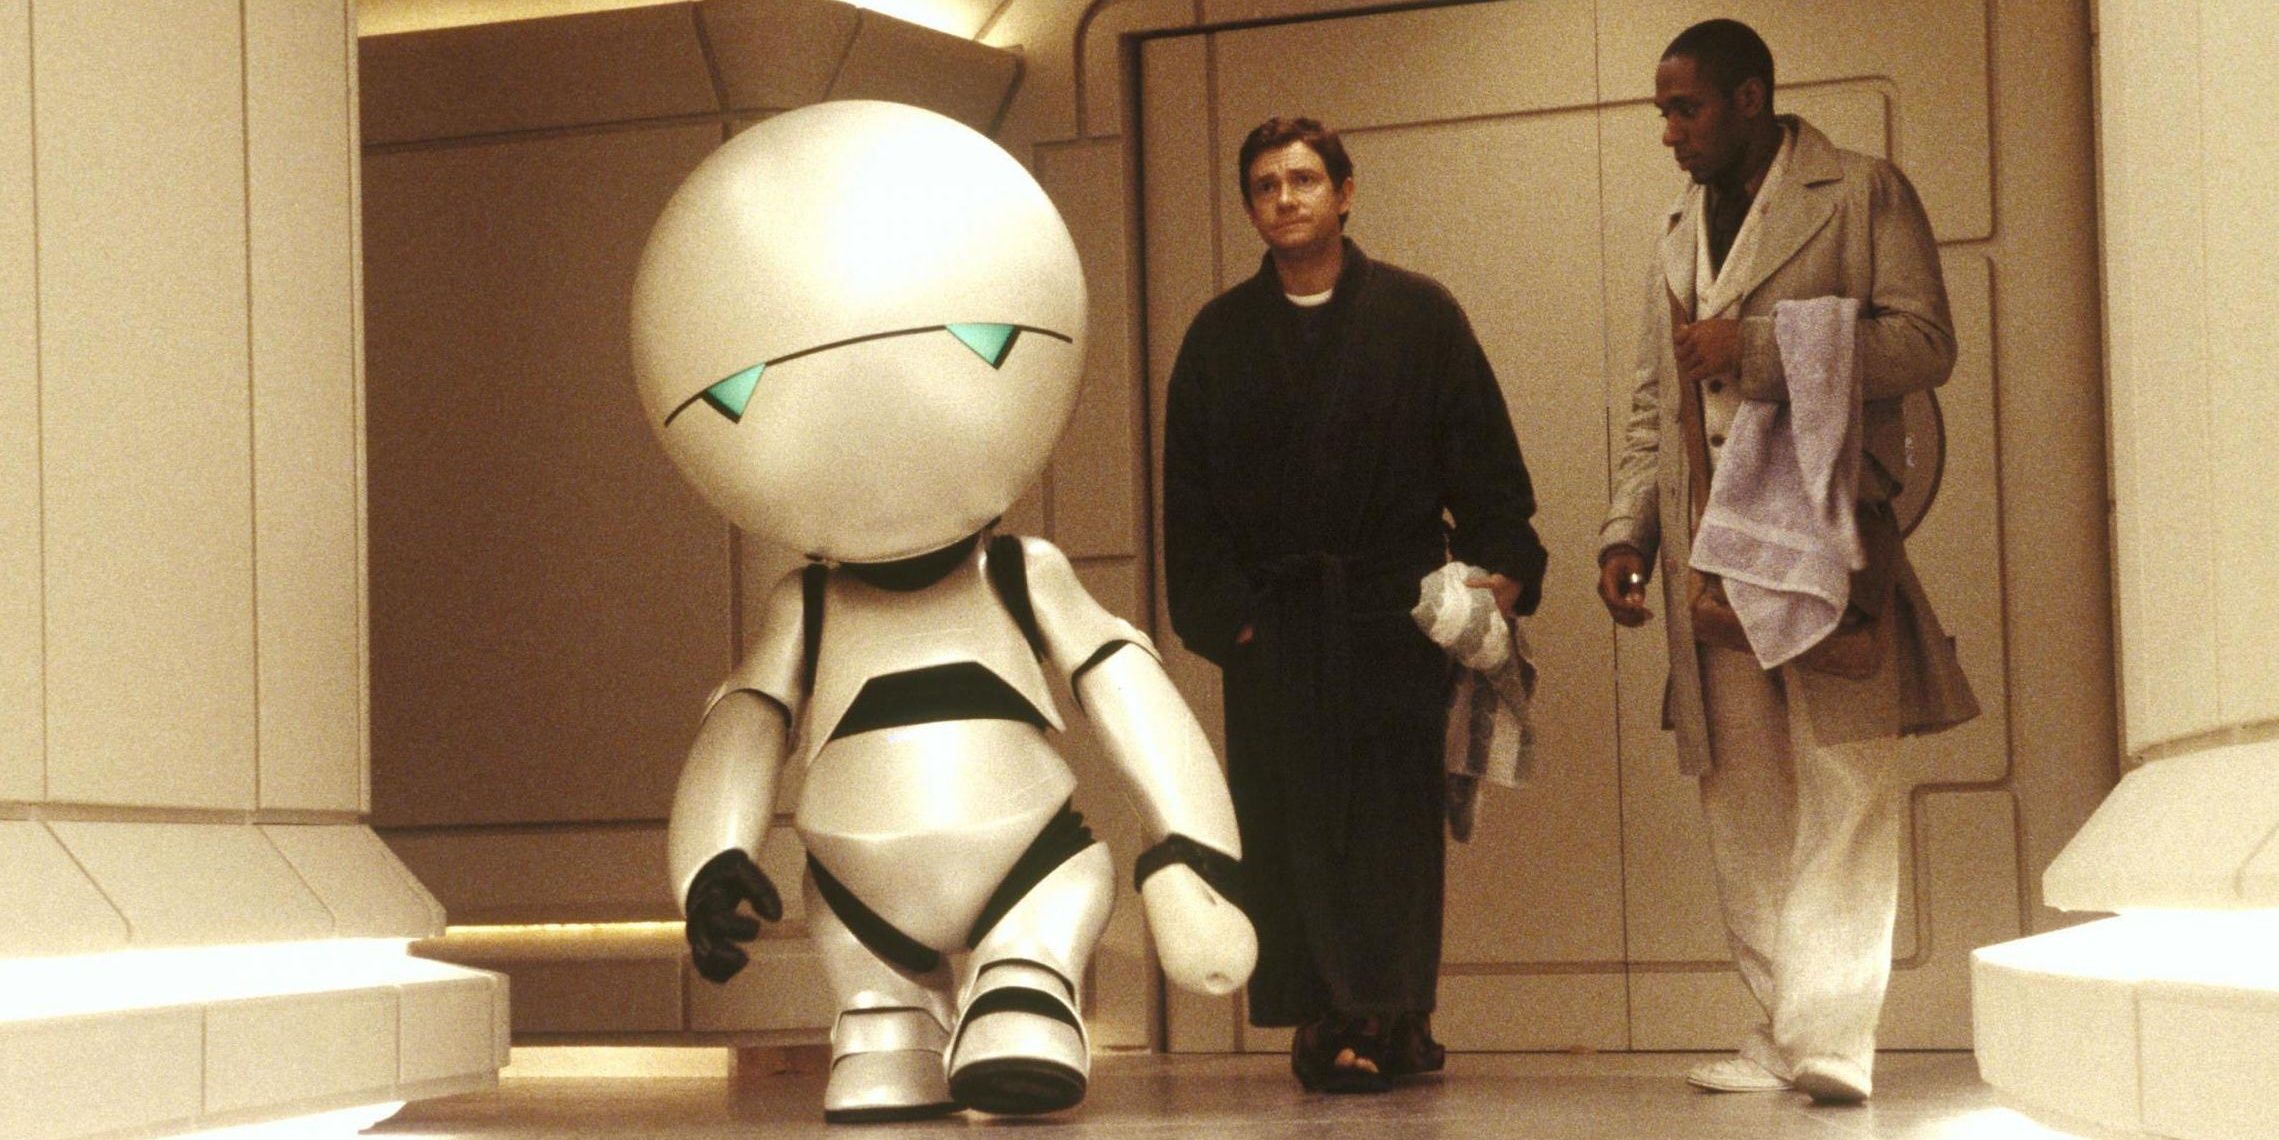 Marvin the Paranoid Android walks while Arthur Dent, played by Martin Freeman, and Ford Prefect, played by Mos Def, follow behind him in the 2005 movie adaptation of The Hitchhiker's Guide to the Galaxy.